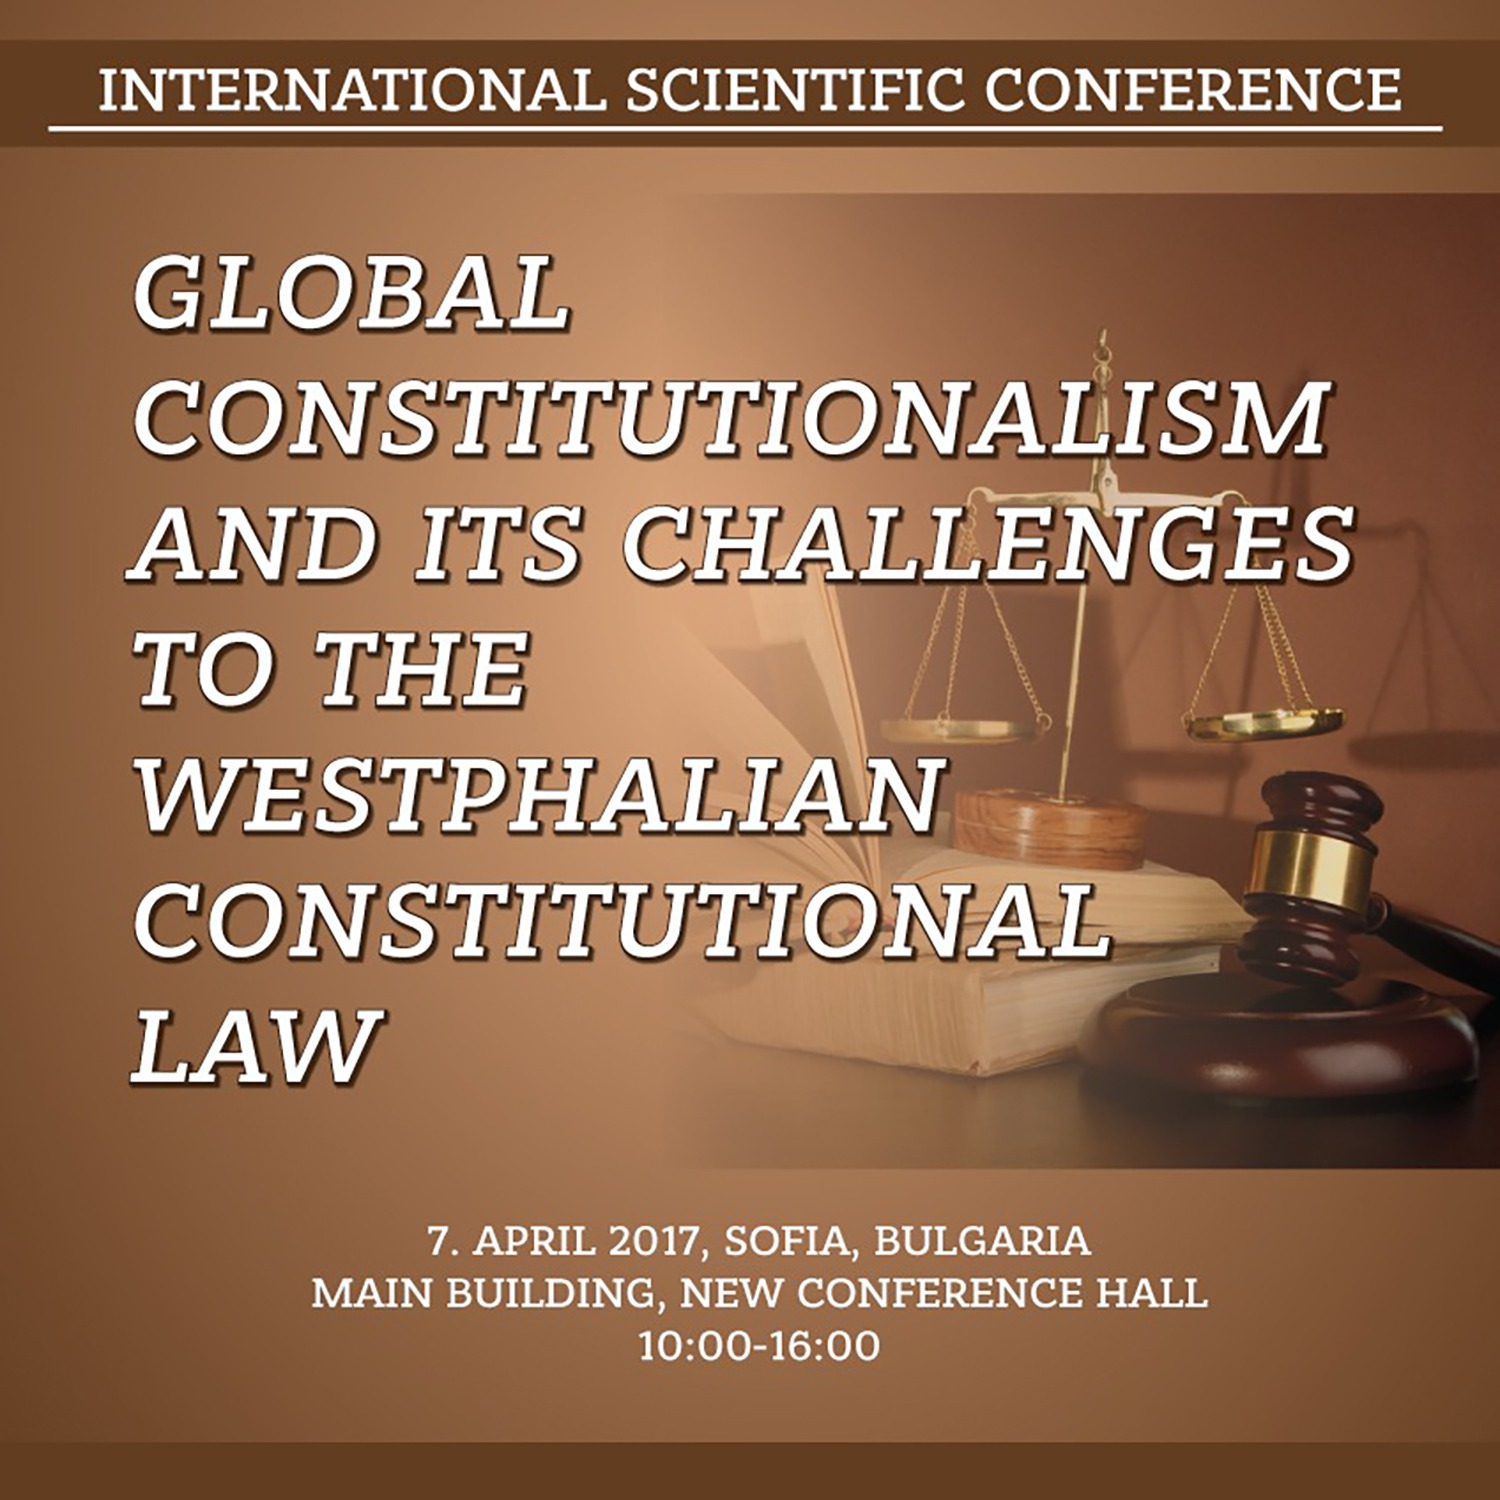 Lecture: Counter-Developments to Global Constitutionalism